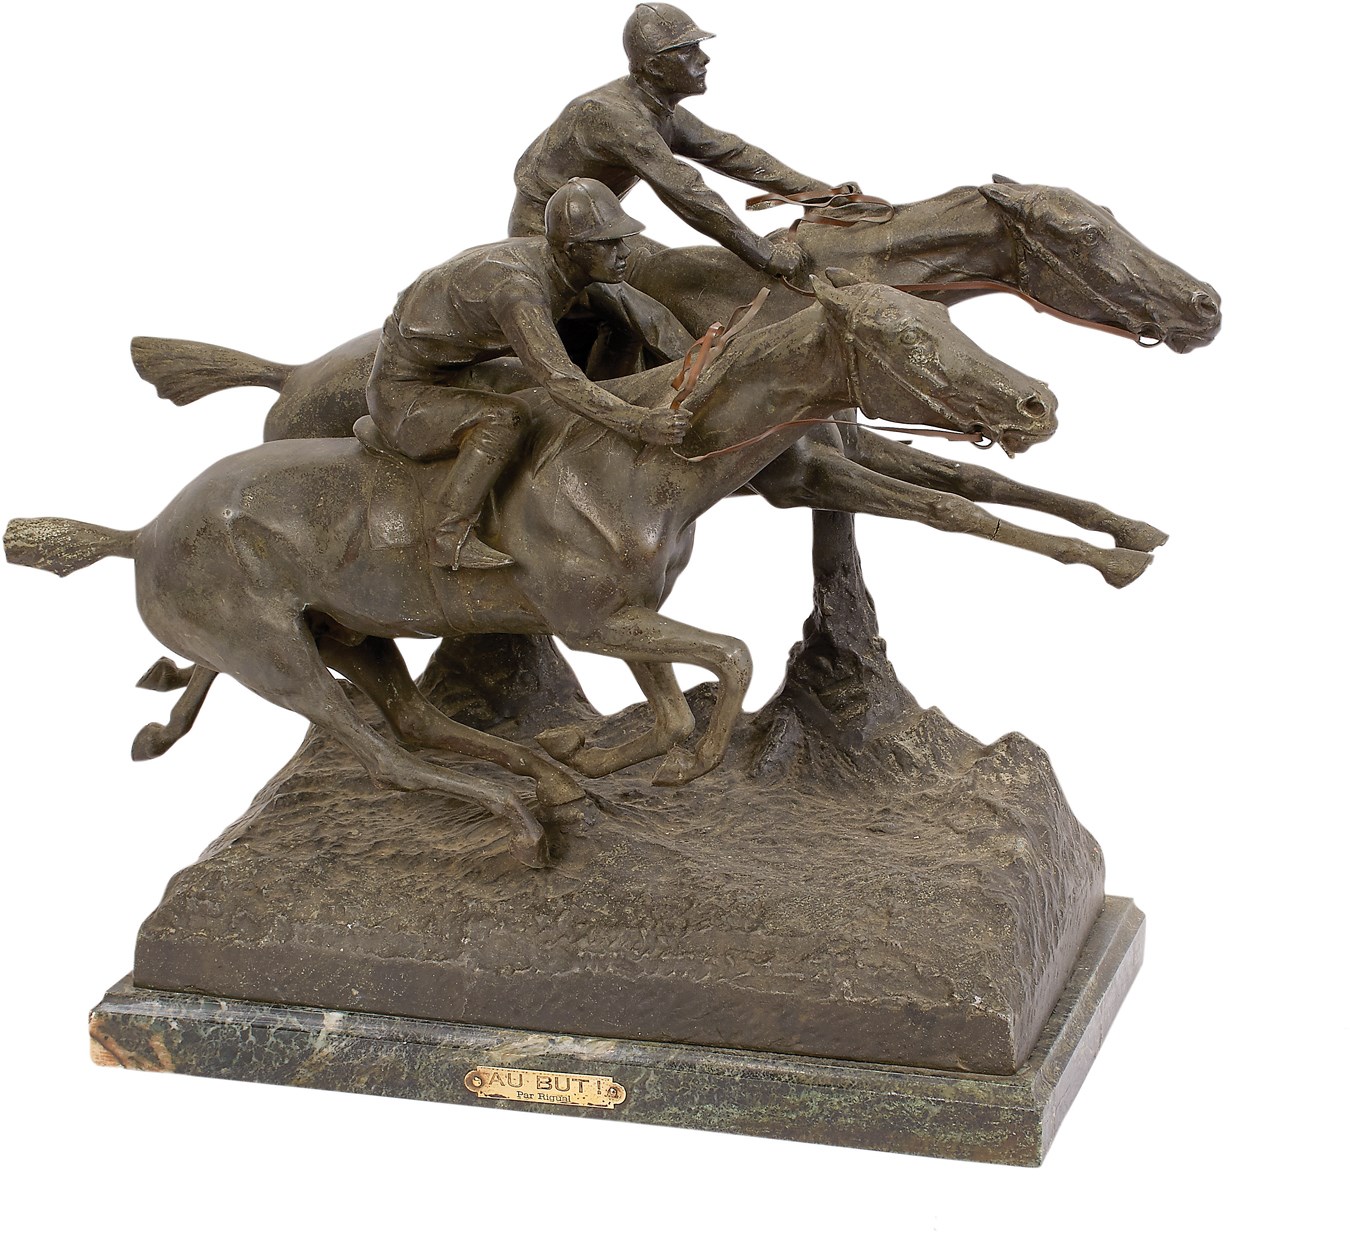 Horse Racing - Resplendent 1890s French Horse Racing Statue By Pedro Ramon Jose Rigual